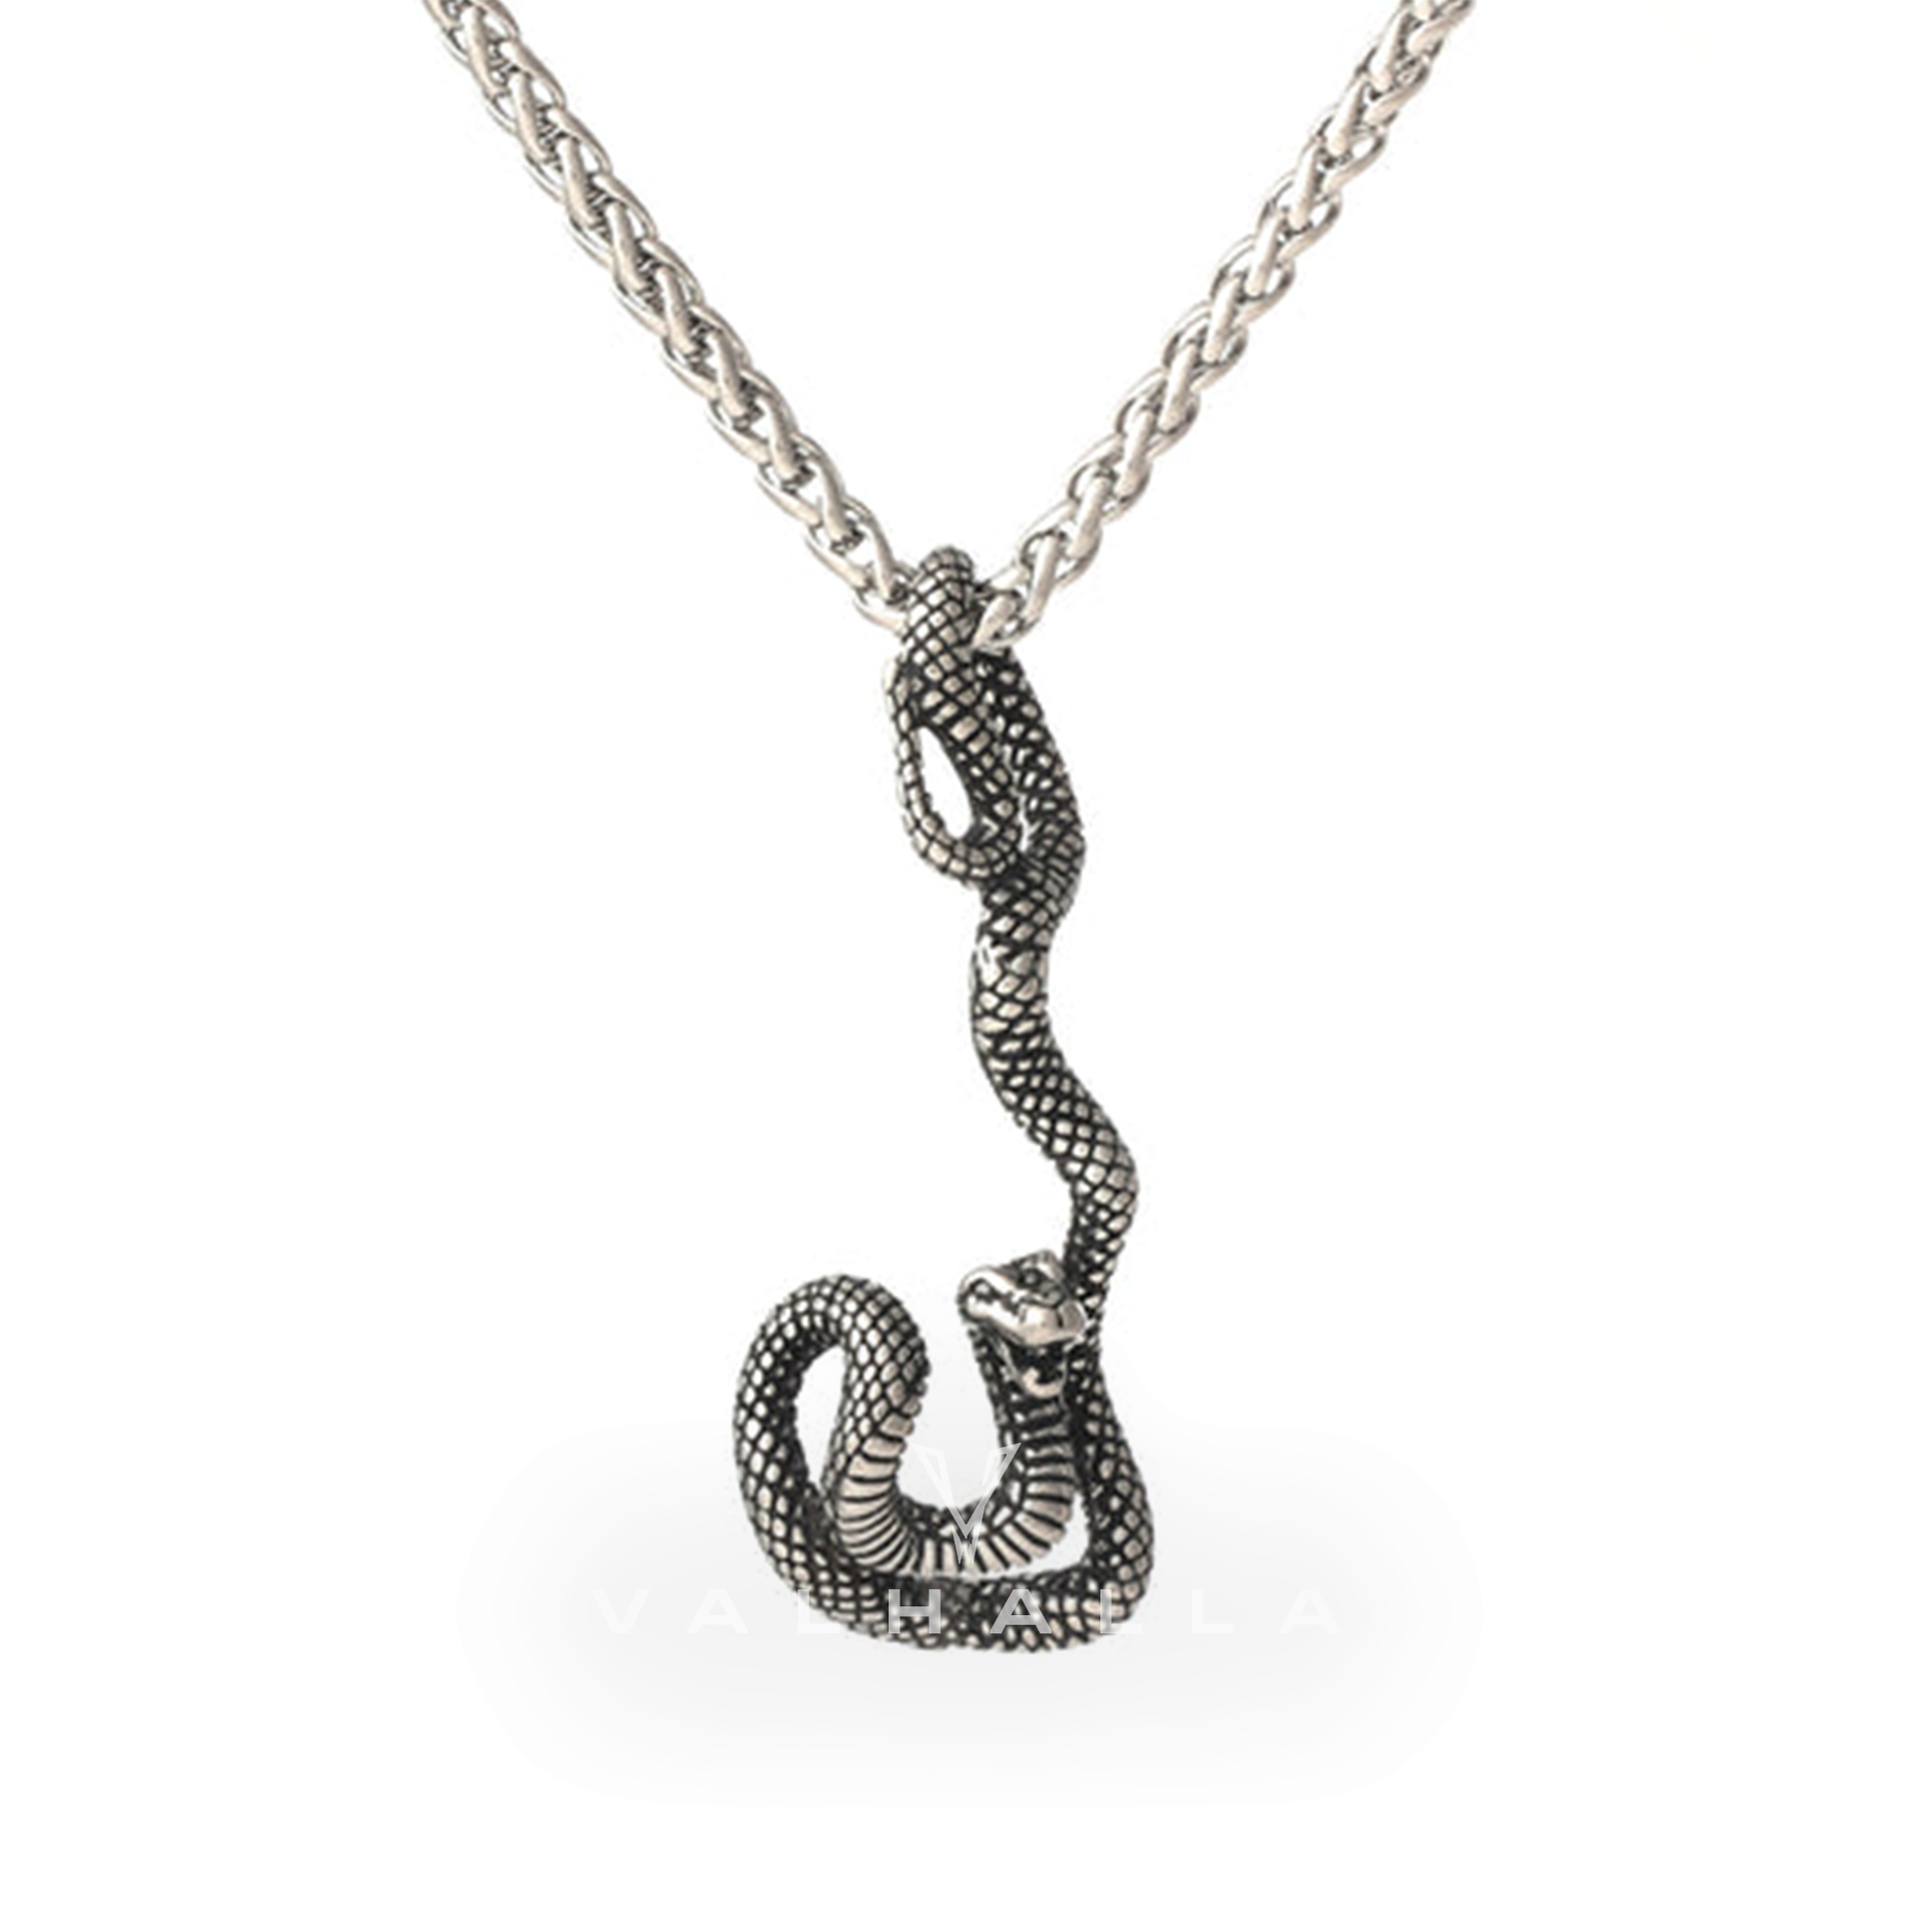 Coiled Snake Stainless Steel Pendant & Chain